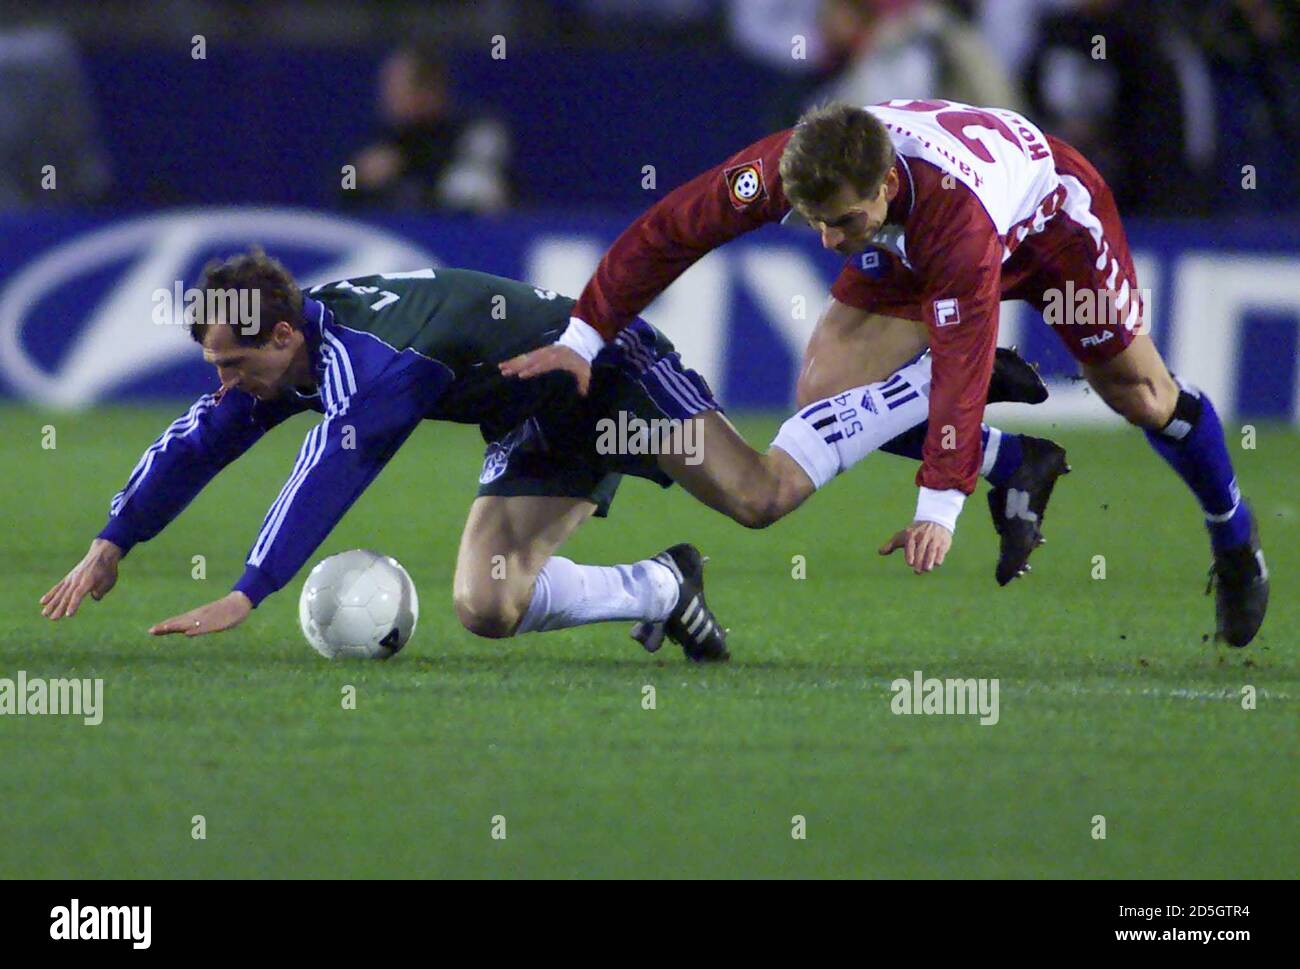 Bernd Hollerbach (R) of the Hamburger Sportverein (HSV) and Radoslav Latal of FC Schalke04 jumps for the ball during their German first league soccer match in Hamburg February 15.  PEM Stock Photo